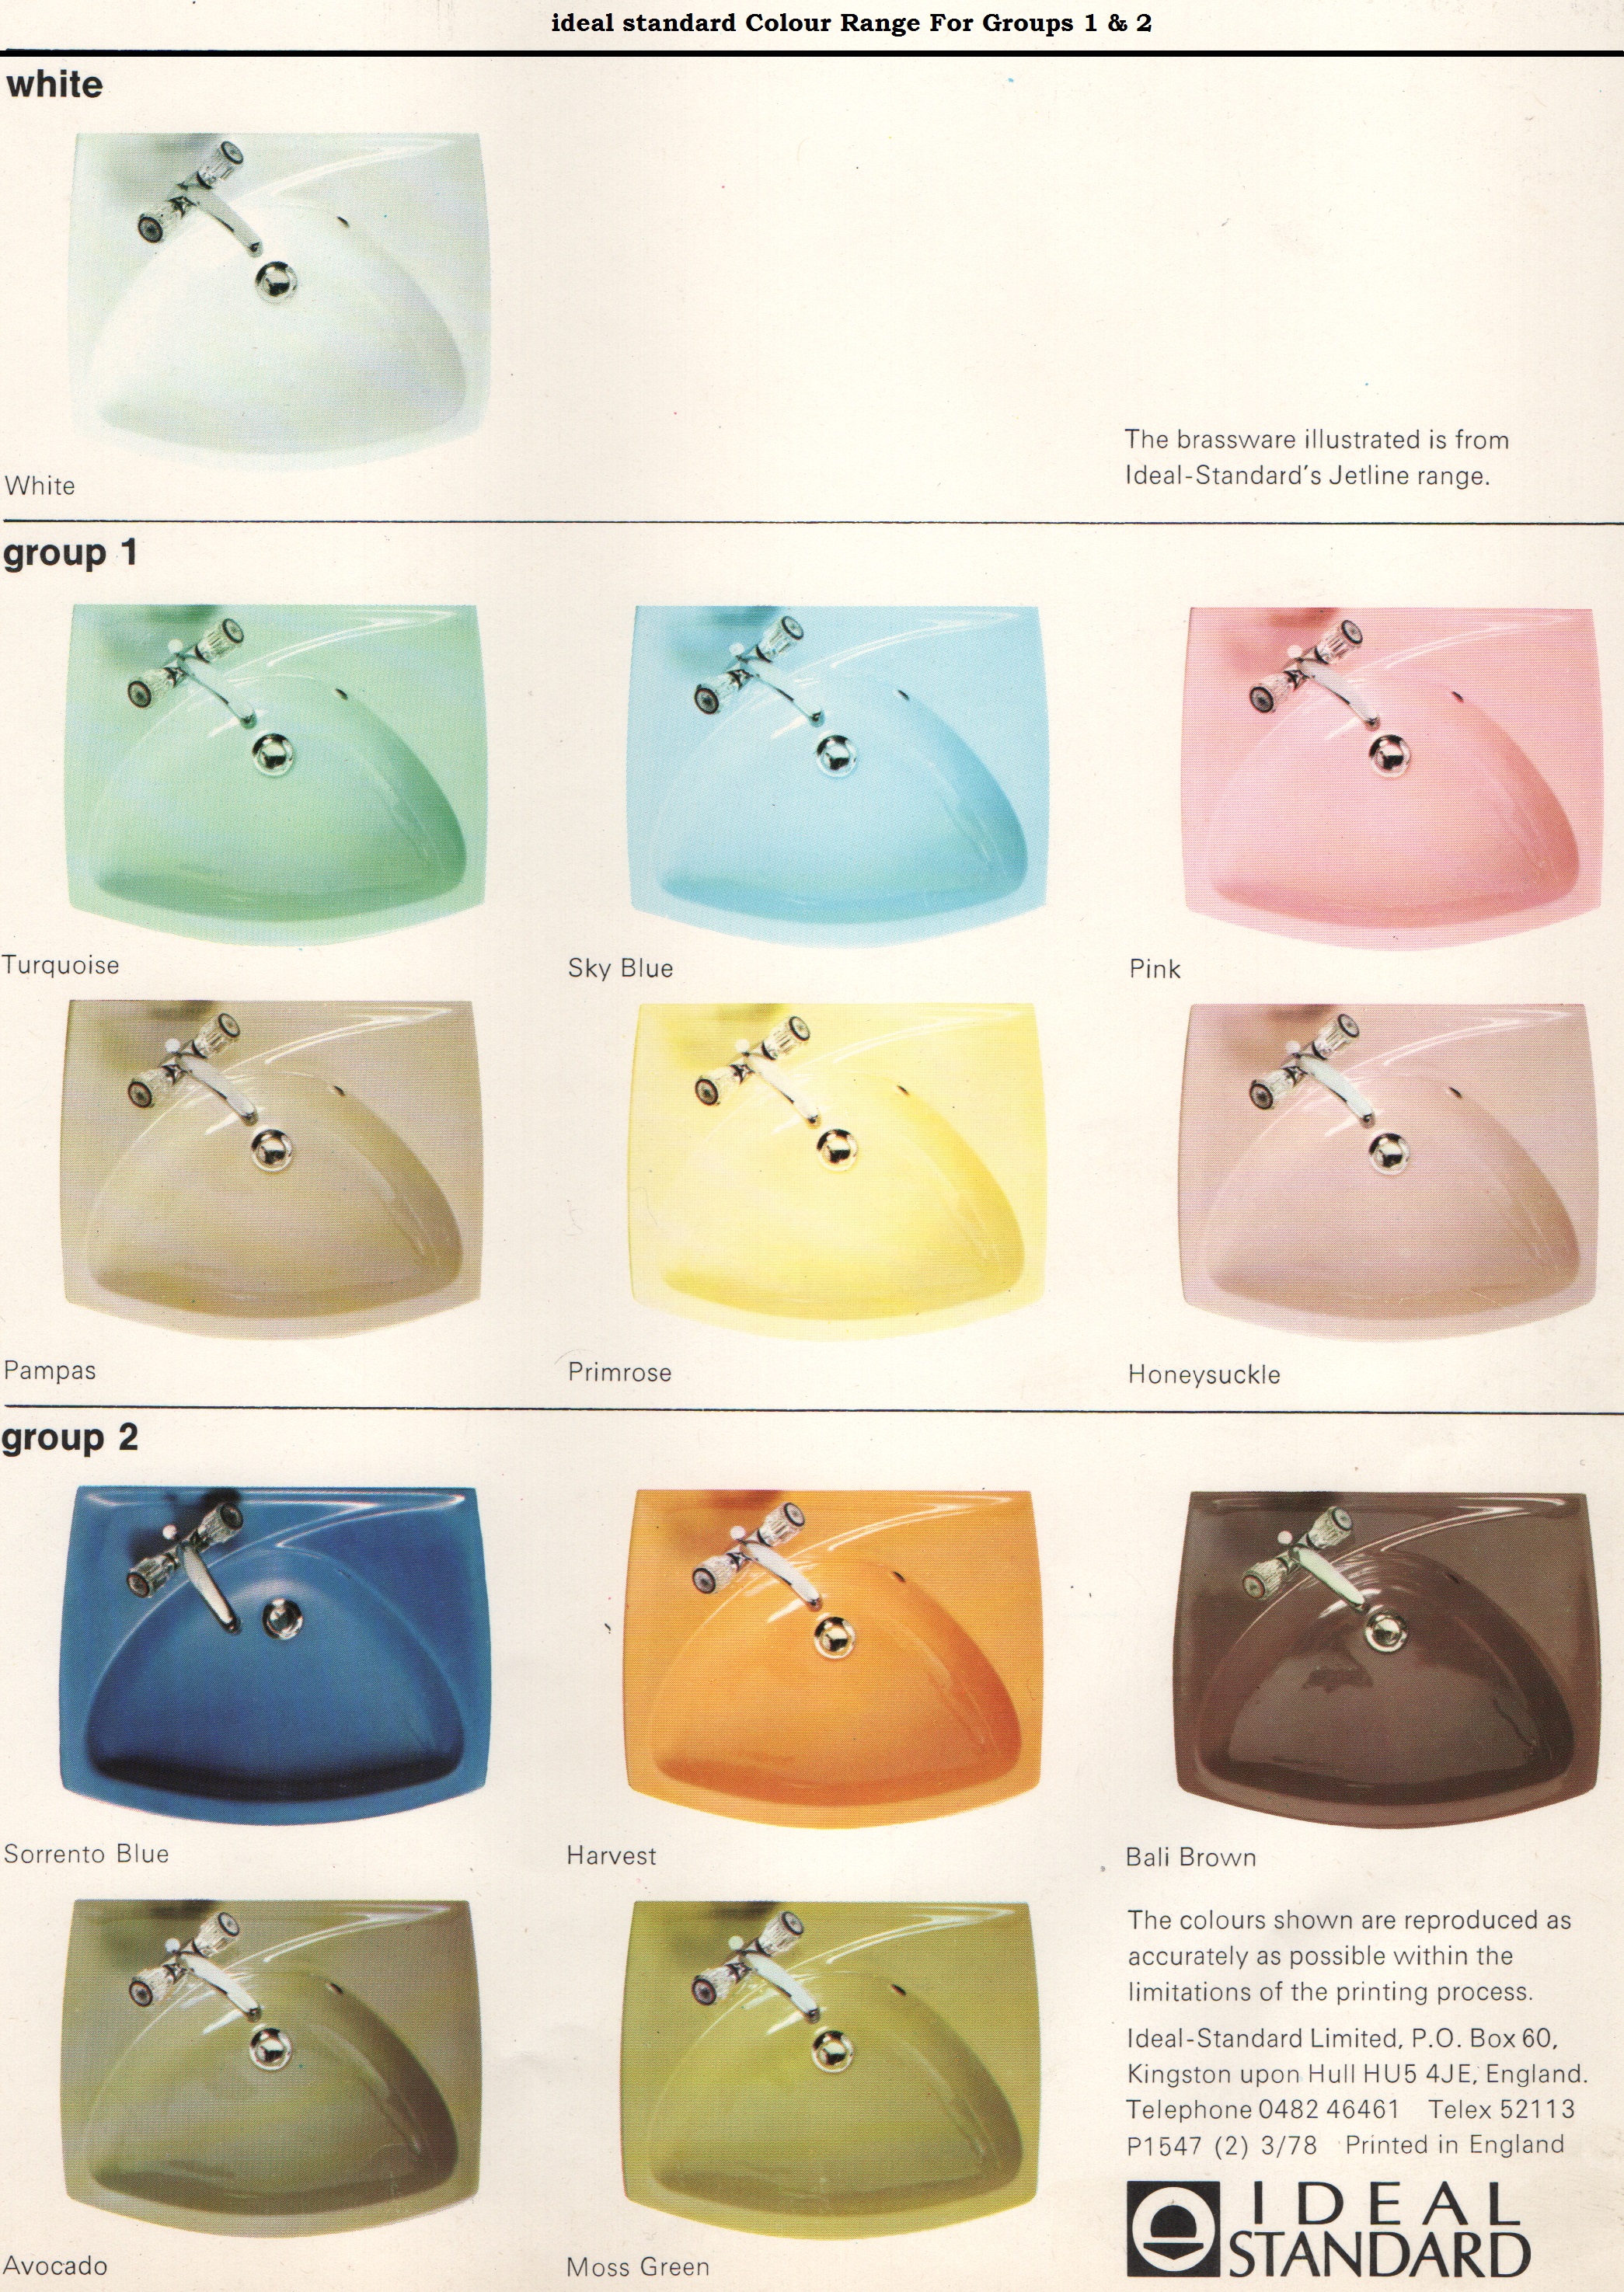 Discontinued Coloured Toilet Seats 